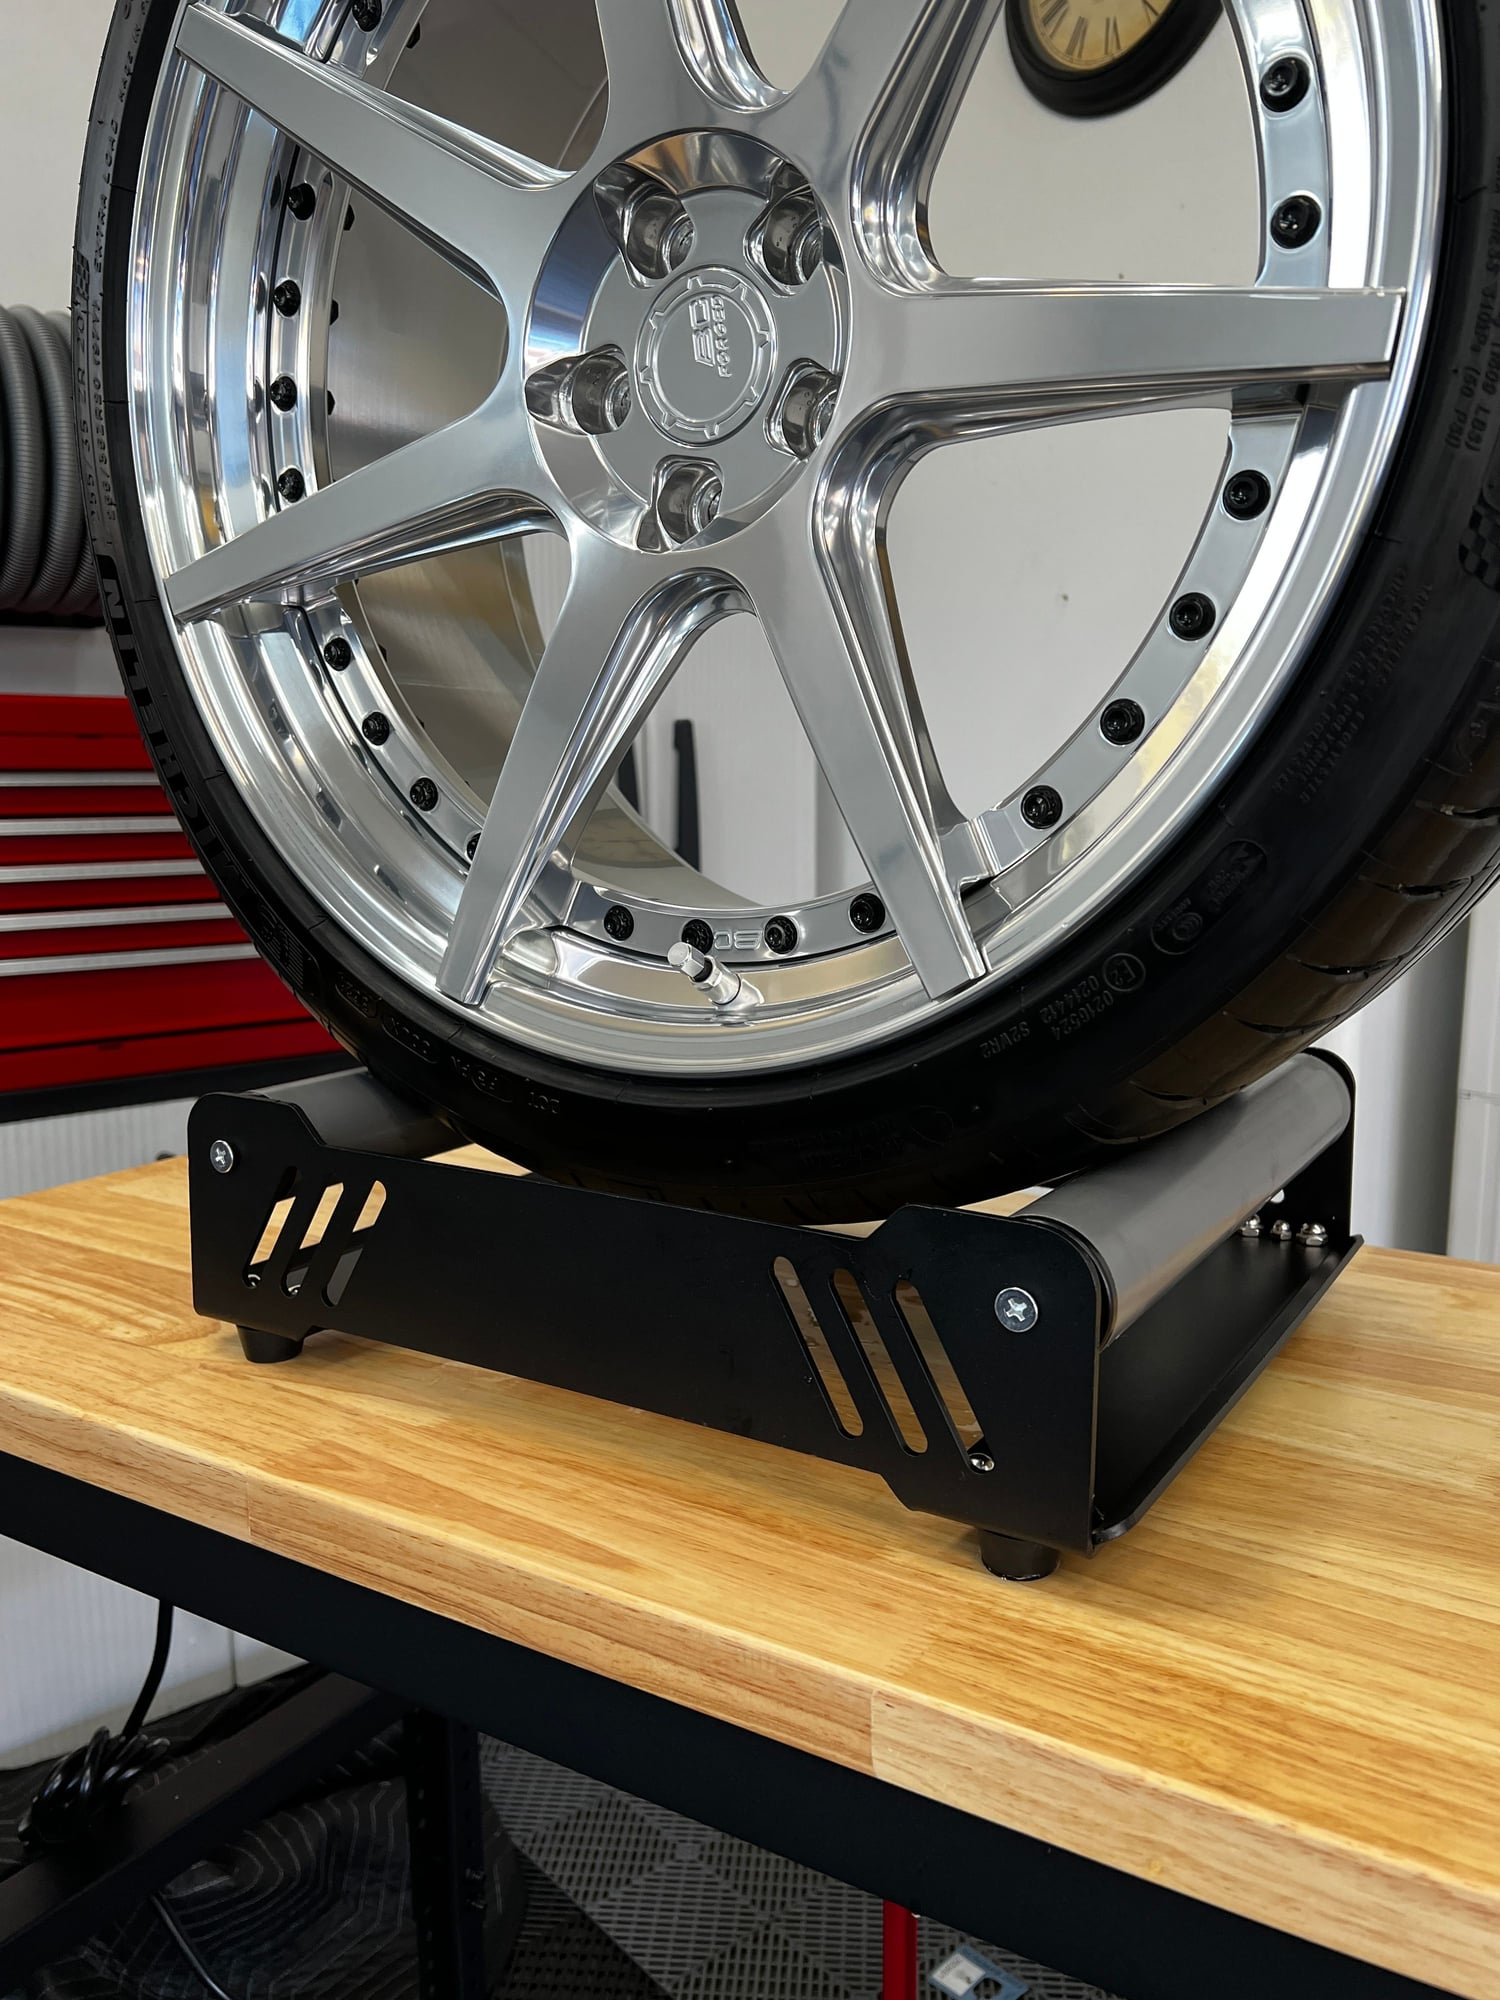 Wheels and Tires/Axles - [New in Box] Wheel & Tire Car Detailing Stand for Cleaning,... - New - 0  All Models - Pleasanton, CA 94566, United States